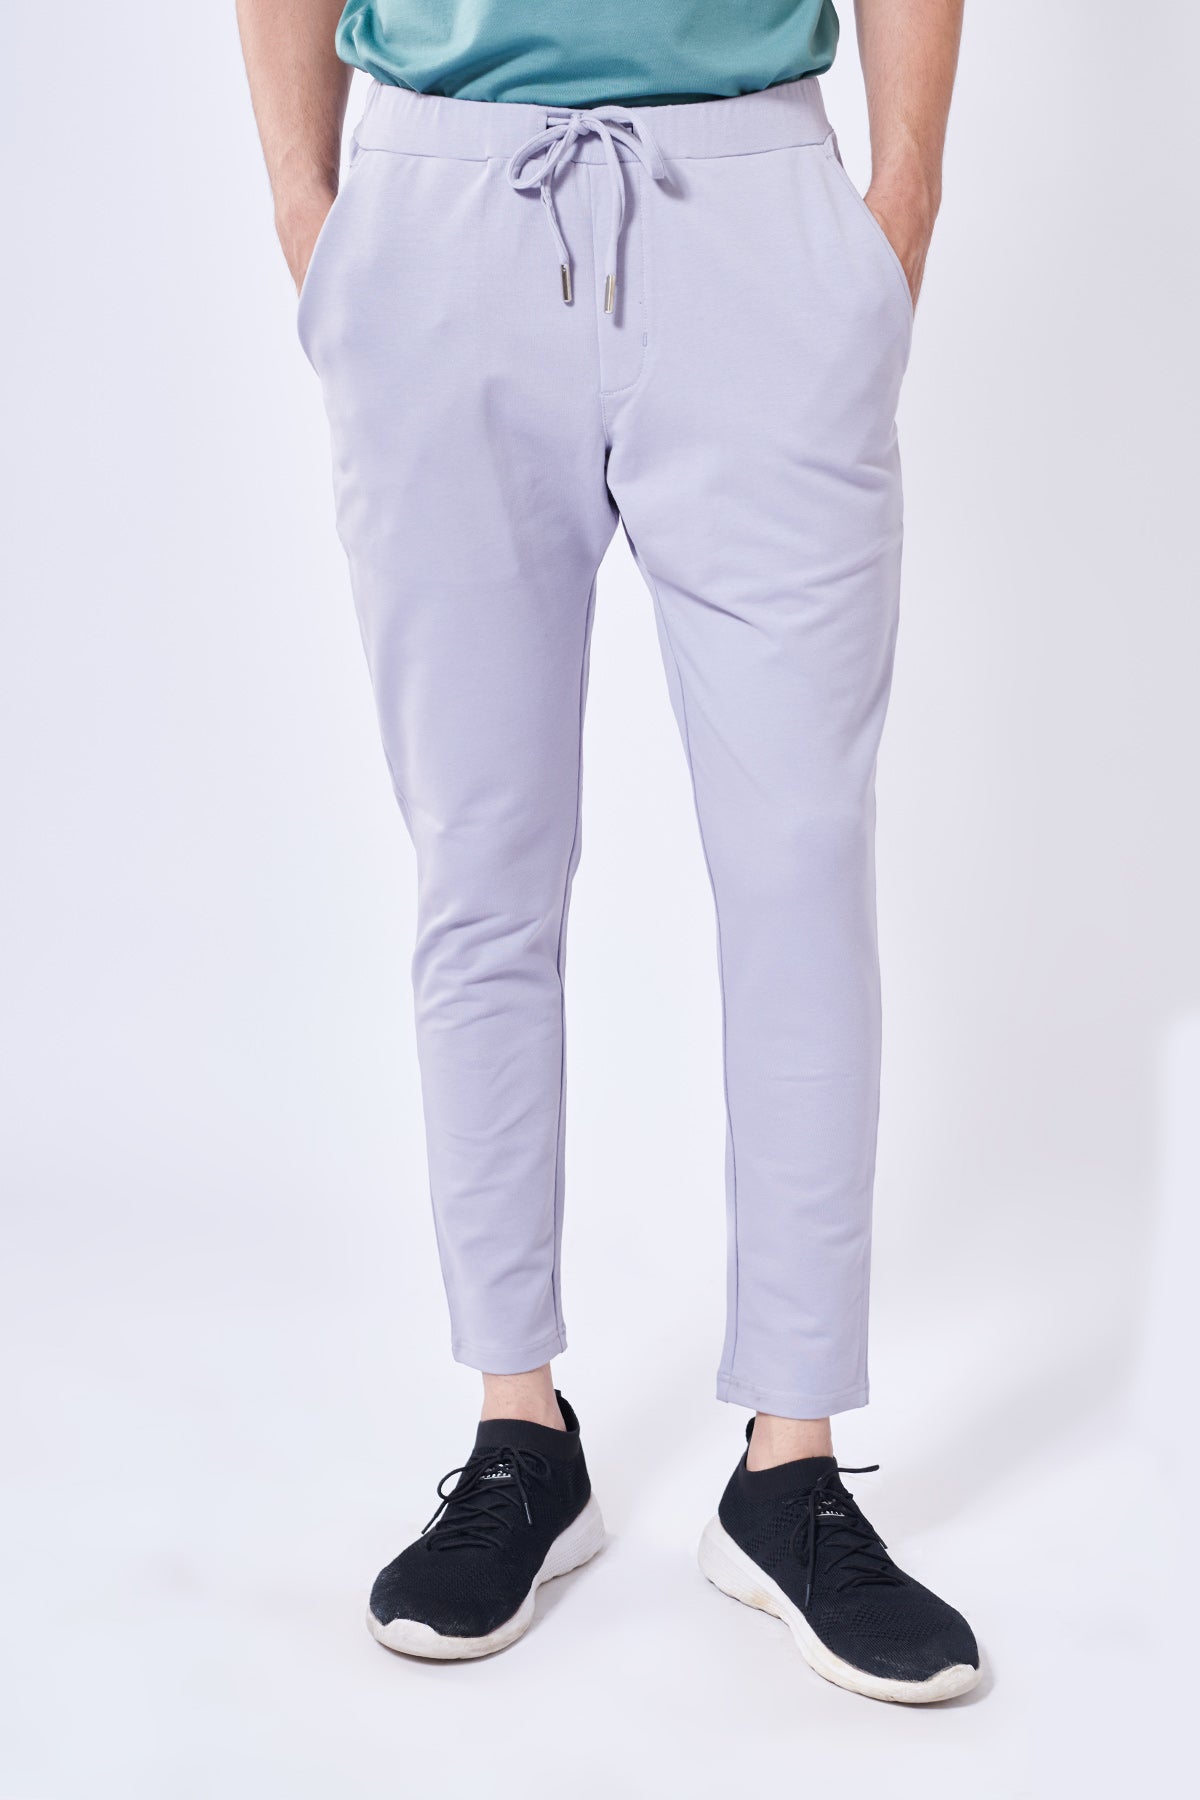 Easy French Grey Sweatpant Beyours Essentials Private Limited